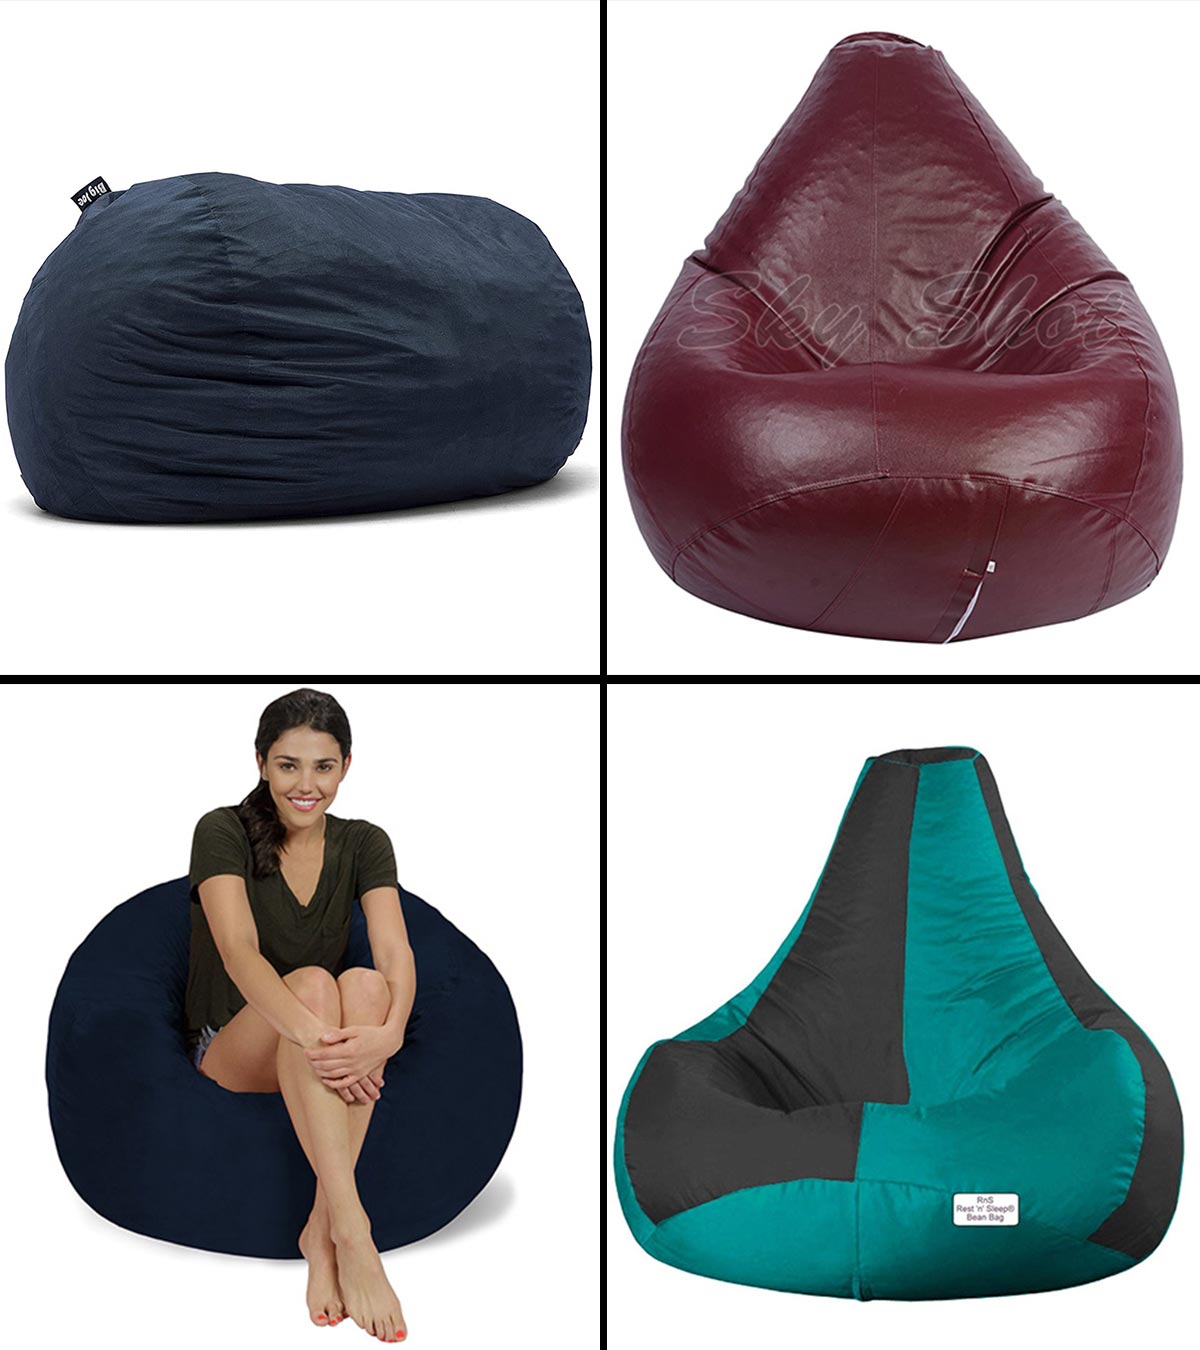 Recliners and bean bags Bangalore  Buy Sell Used Products Online India   SecondHandBazaarin